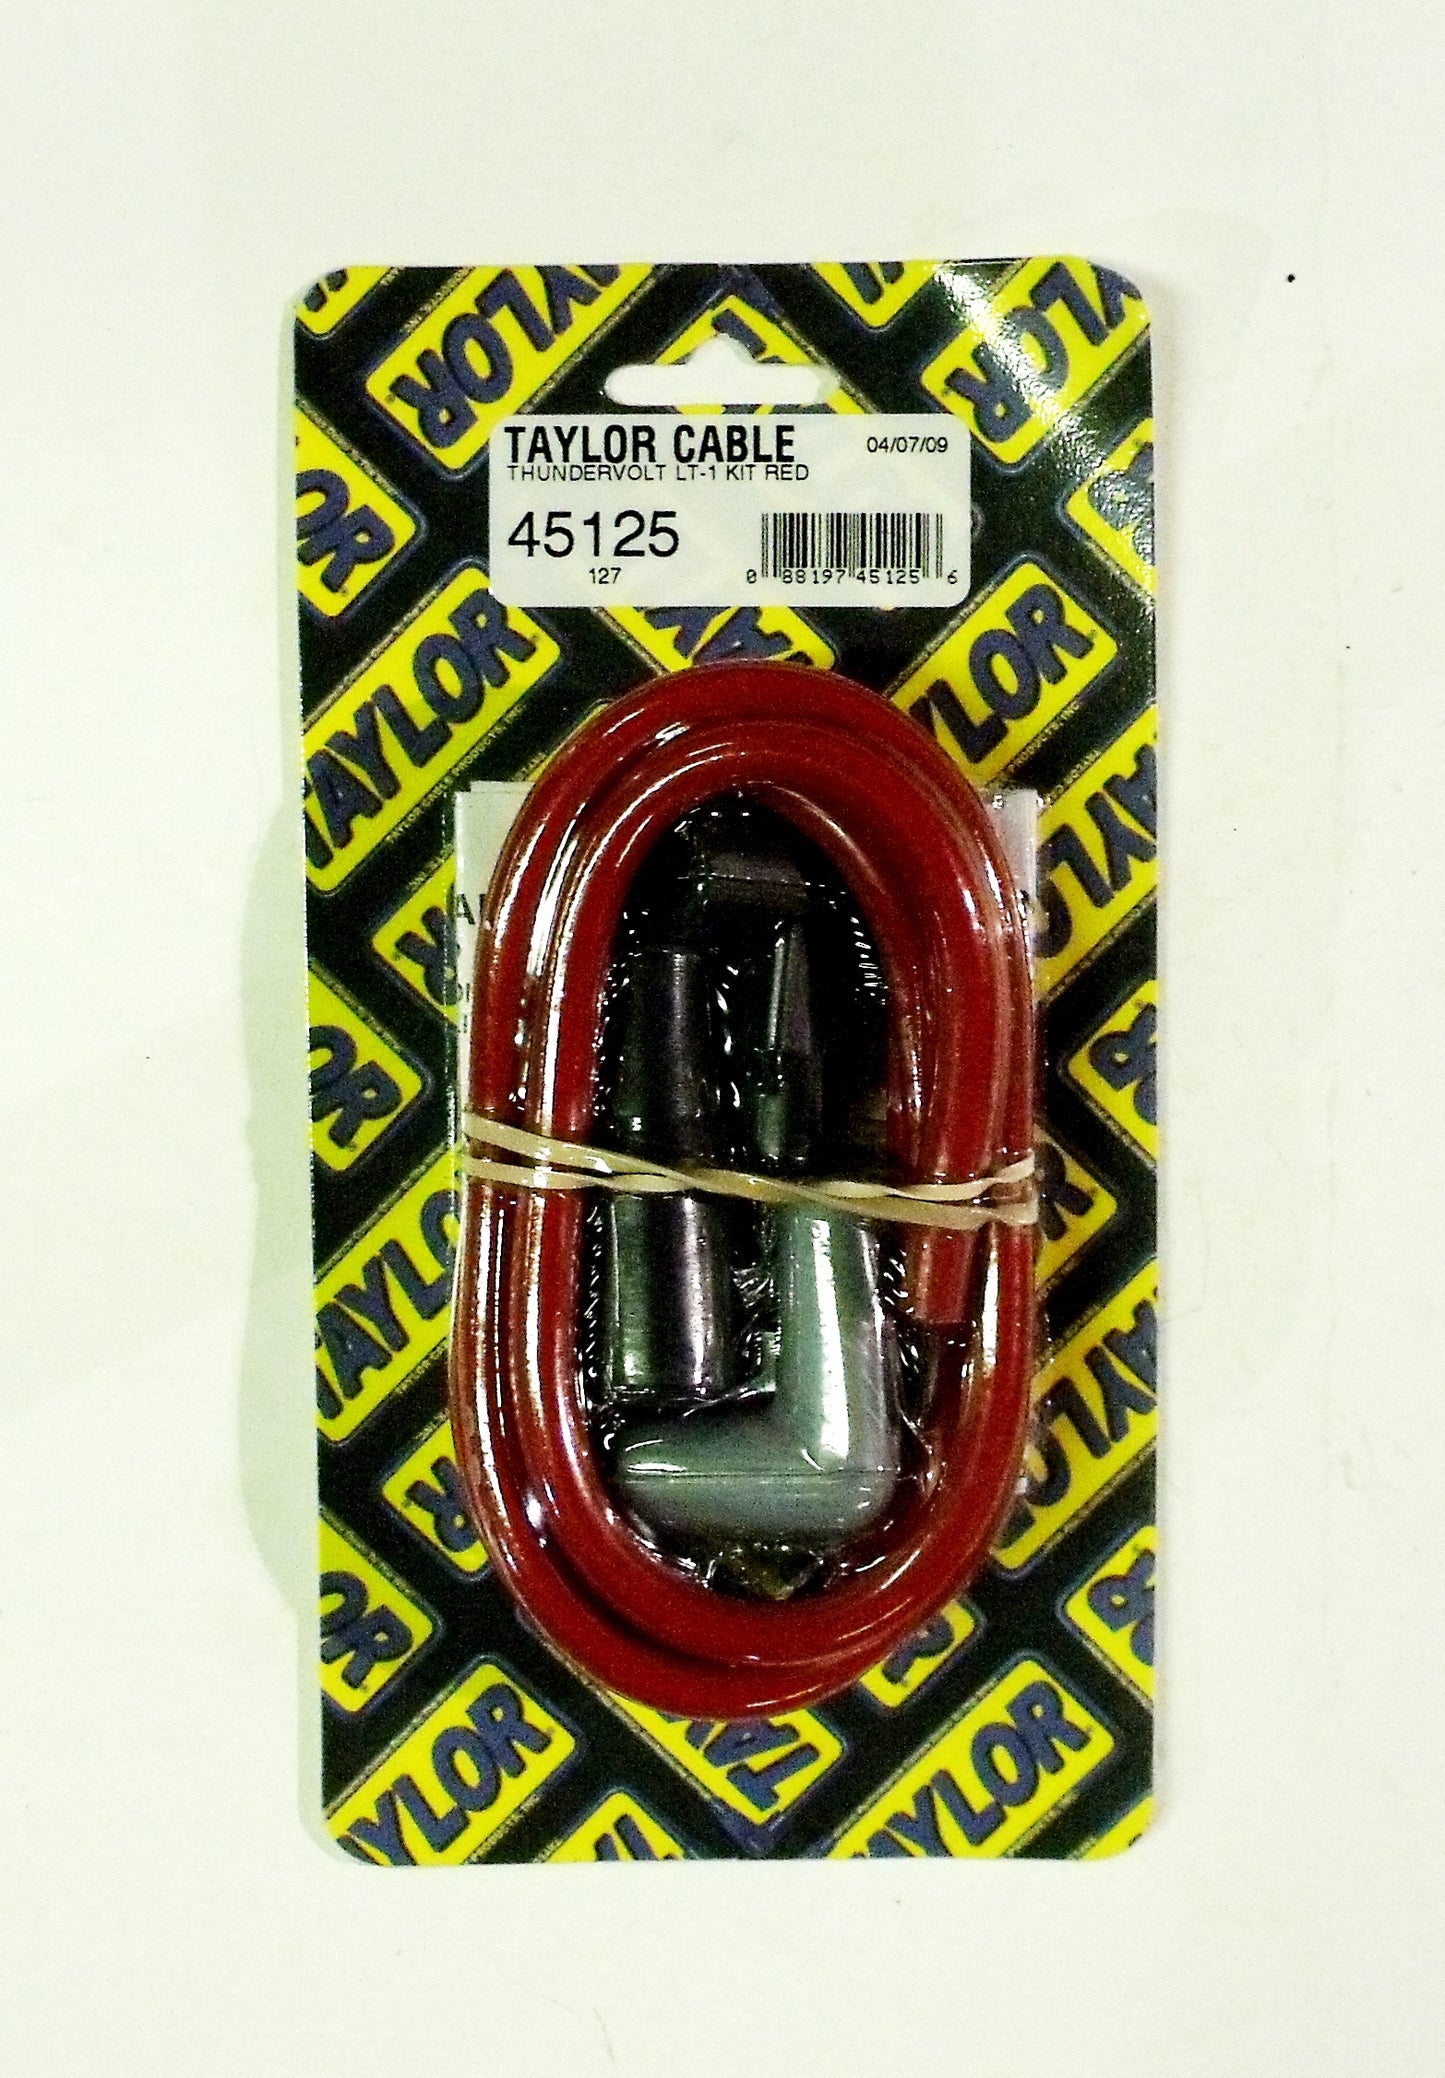 Taylor Cable  45129 Thundervolt 8.2 Coil Repair Kit red